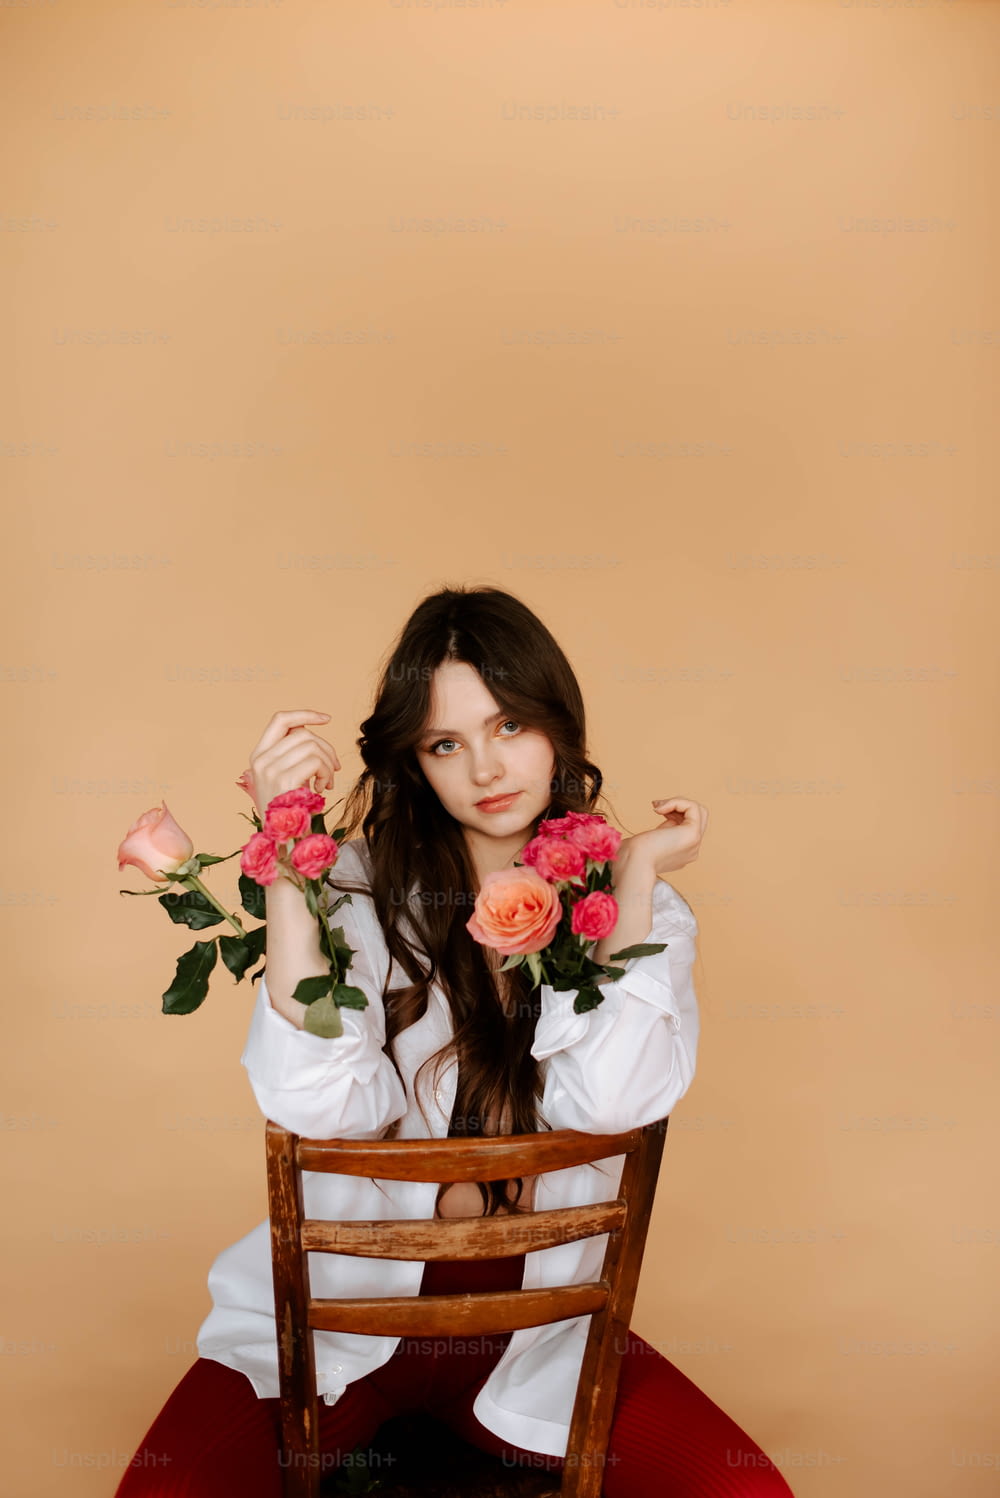 a woman sitting on a chair holding roses